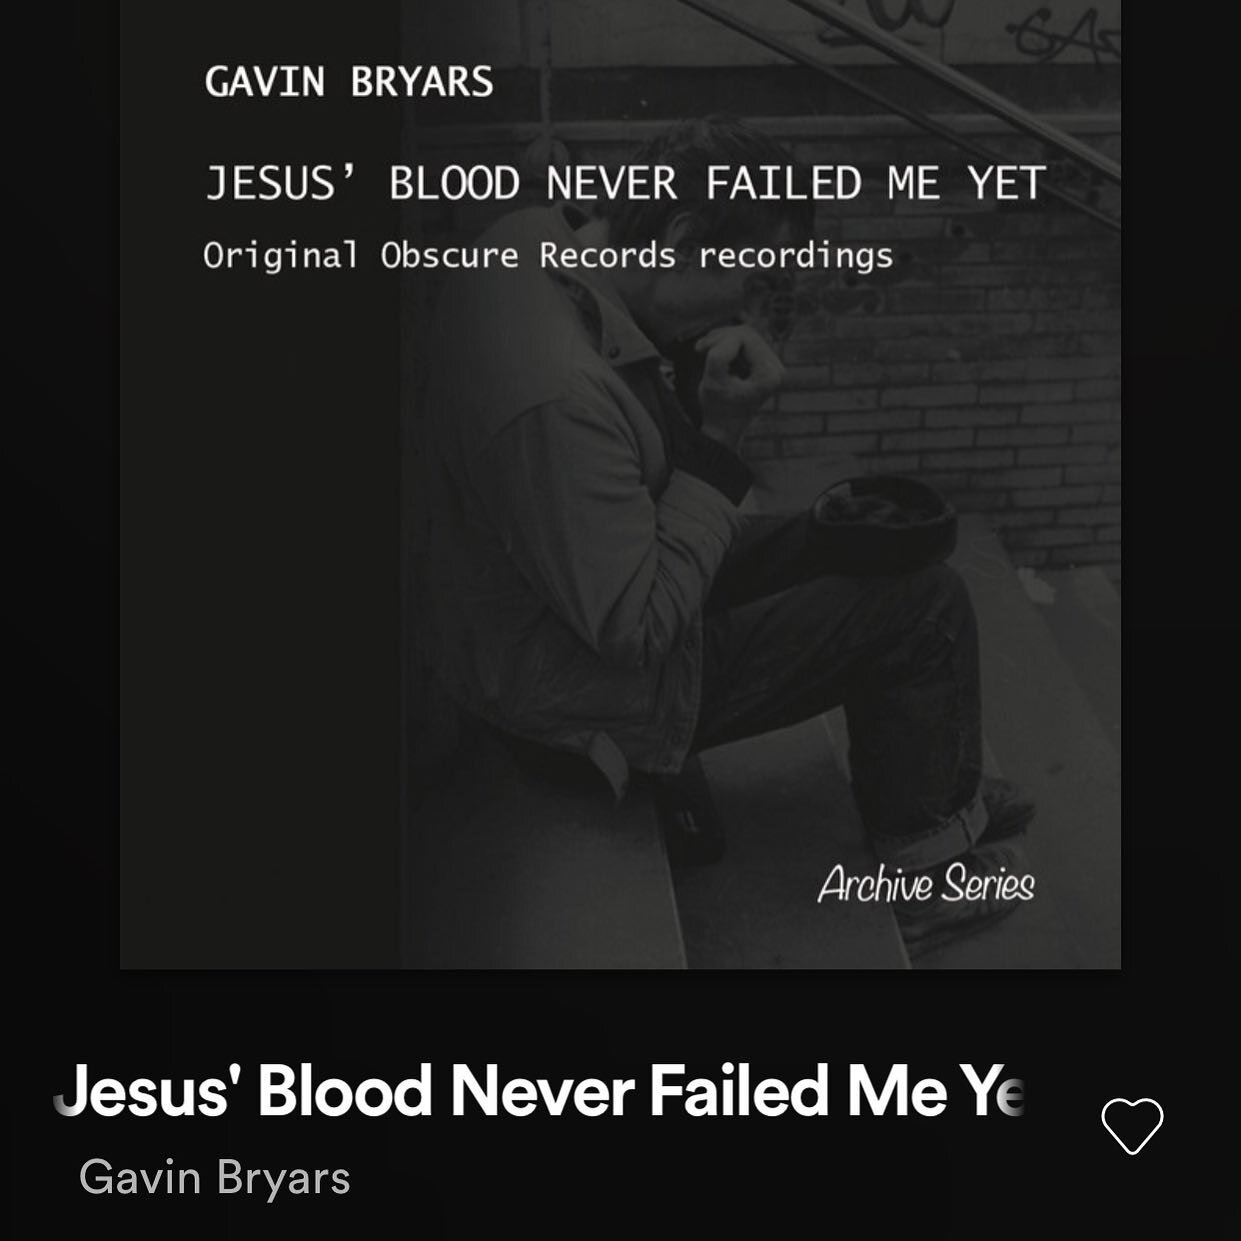 When low and searching for meaning in this challenging and unjust world, there is always music. #music #goodsong #goodmusic #greatmusic #jesusblood #jesusbloodsong #gavinbryarsensemble #gavinbryars #mercunningham #musicforthedance